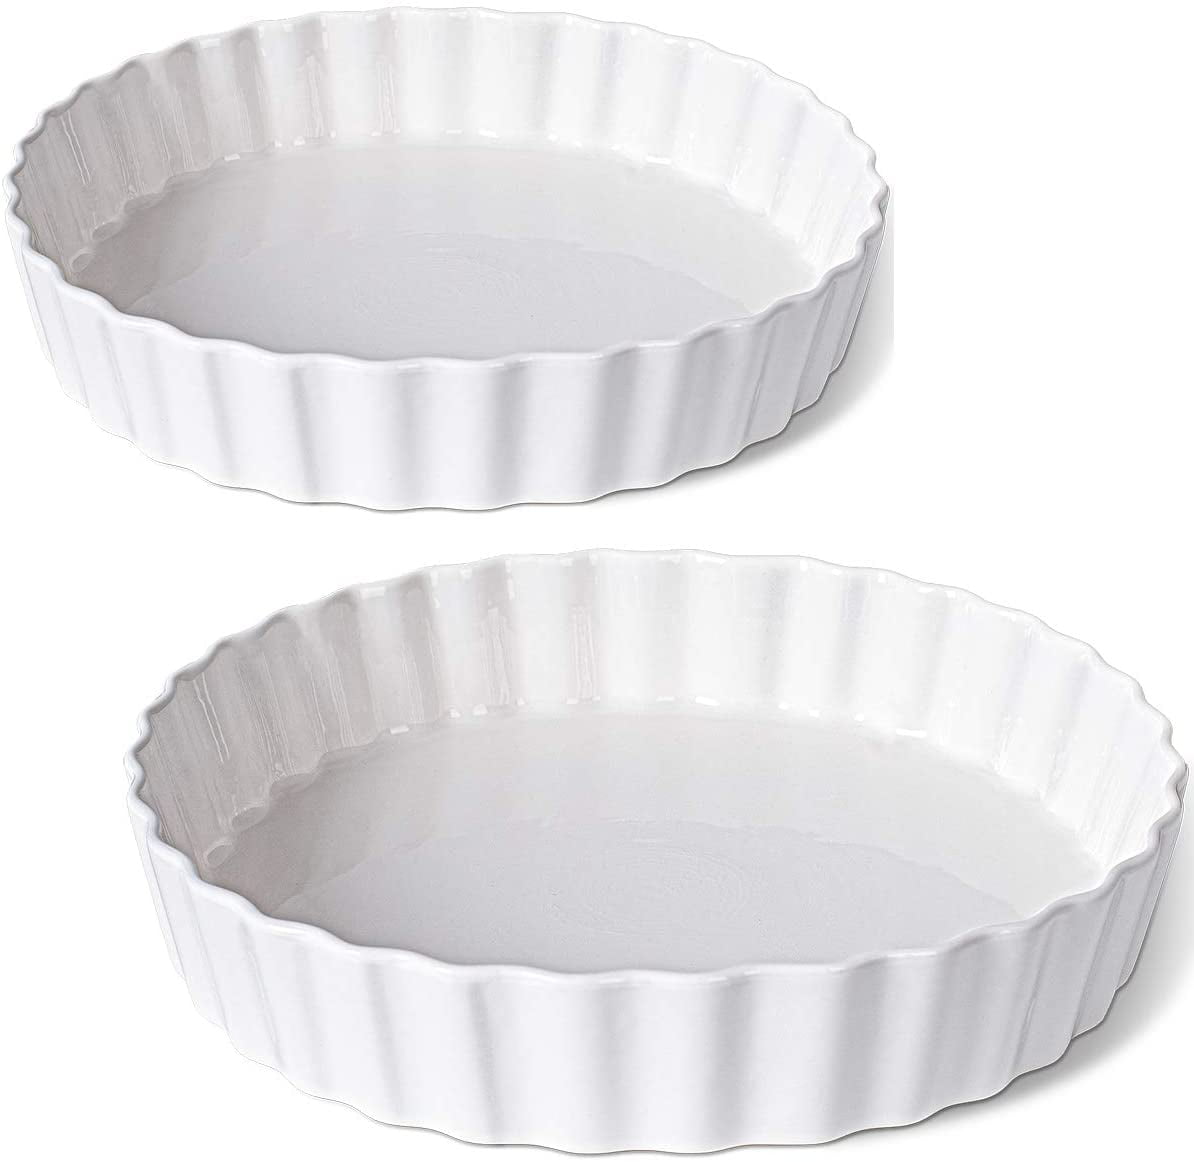 Set of 4 5 Inch White Ceramic Essentials Tart Plates Mini Fluted Quiche Dishes by CIROA 